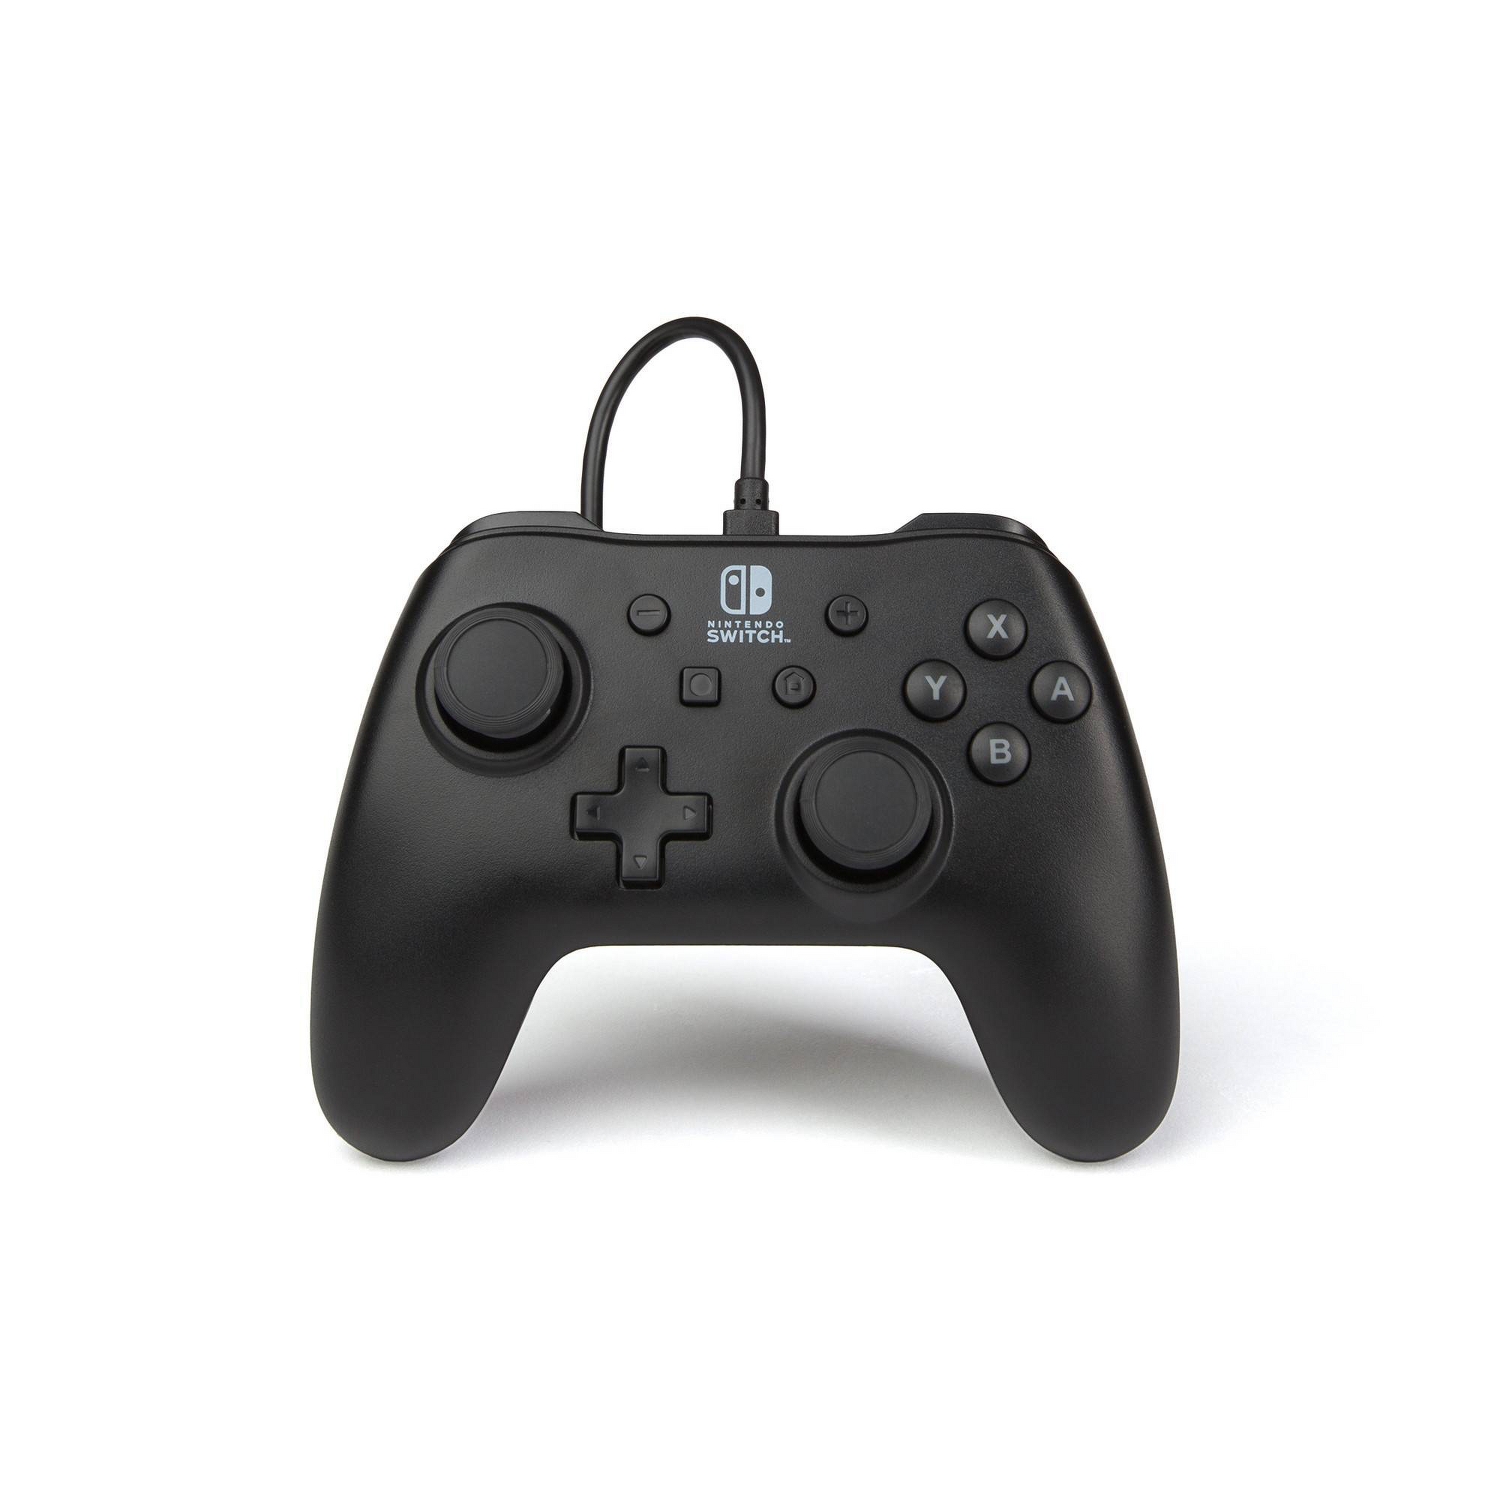 PowerA Wired Controller for Nintendo Switch - Black - $11.99 at Target